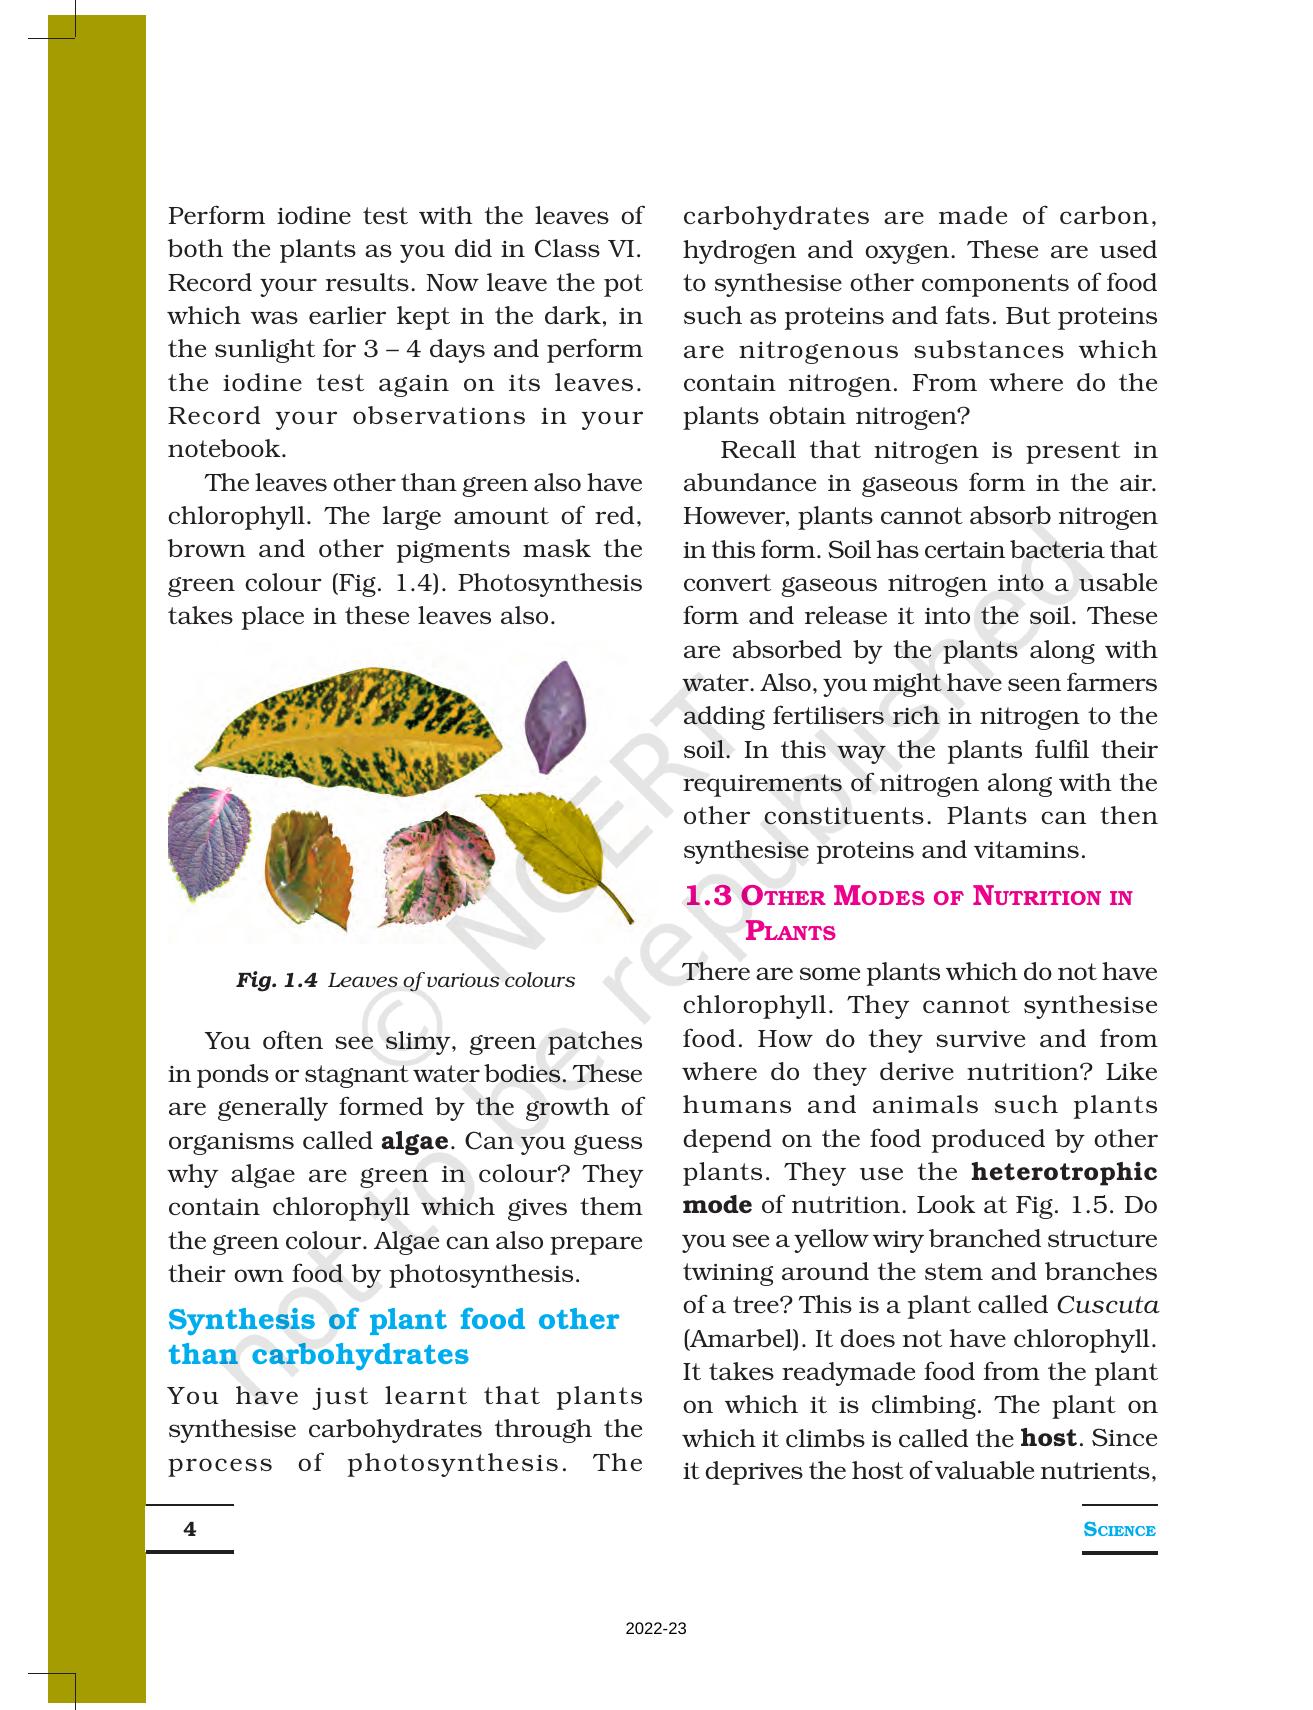 NCERT Book for Class 7 Science: Chapter 1-Nutrition in Plants - Page 4